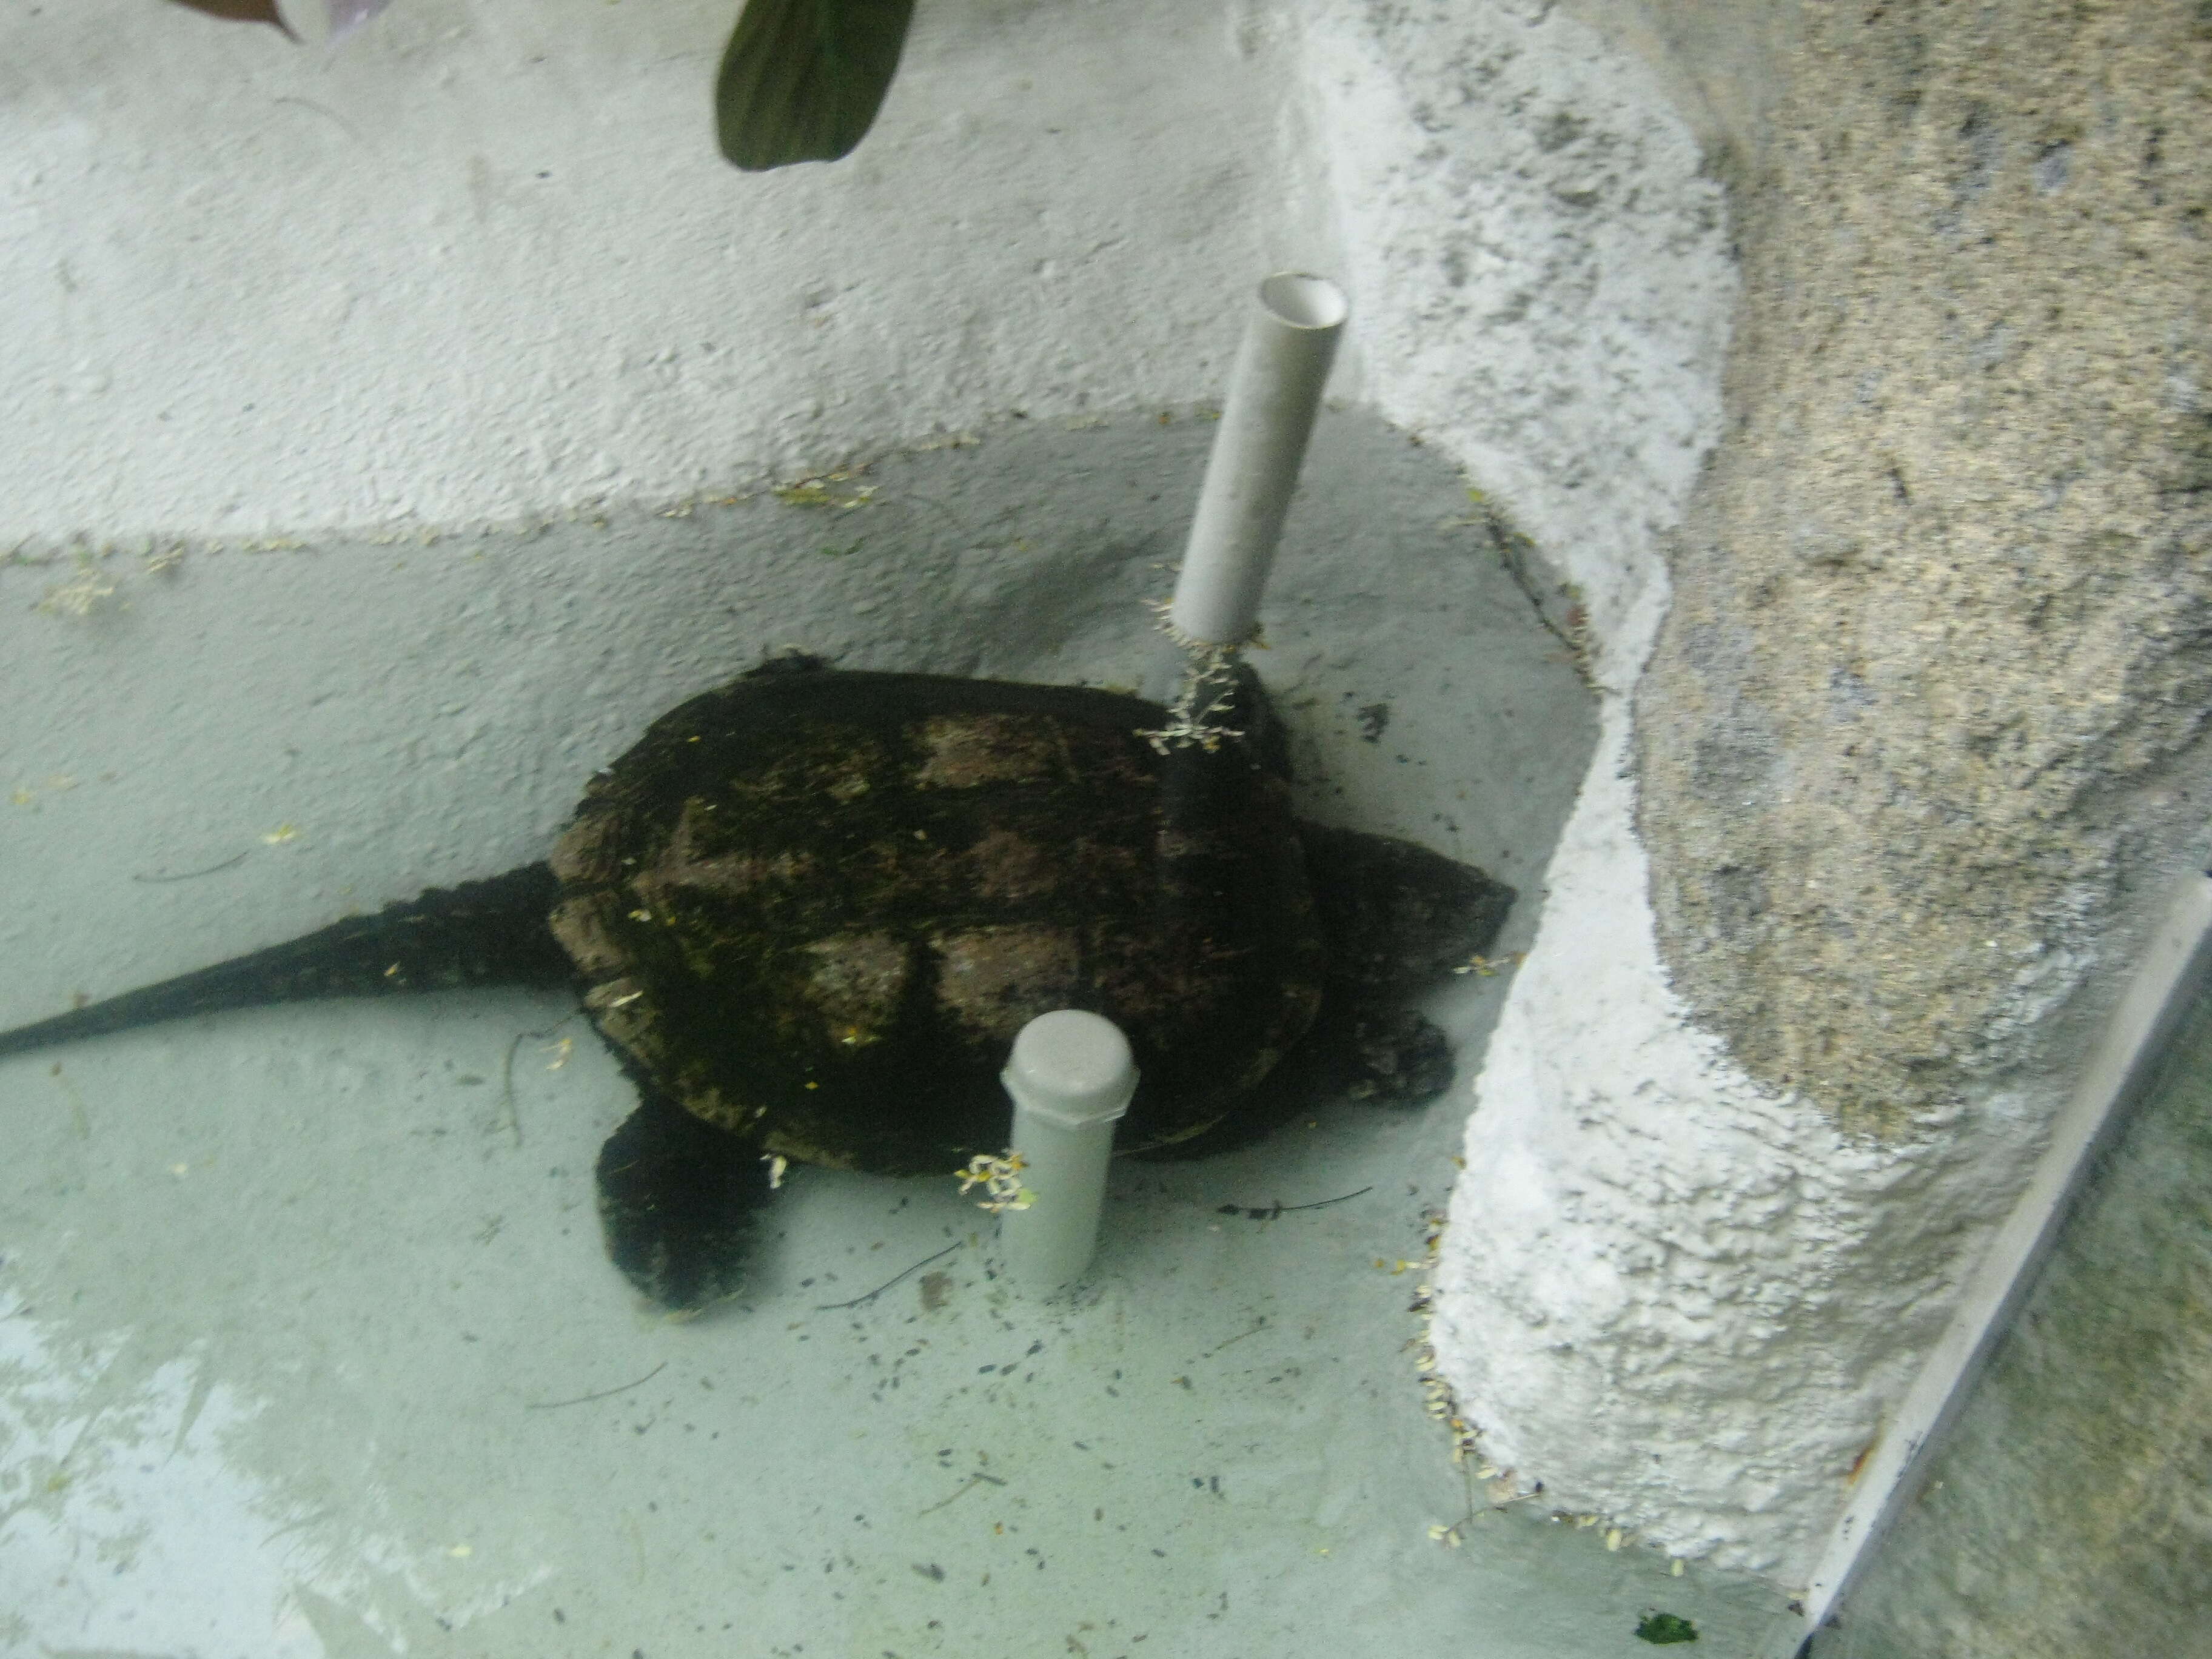 Image of South American snapping turtle